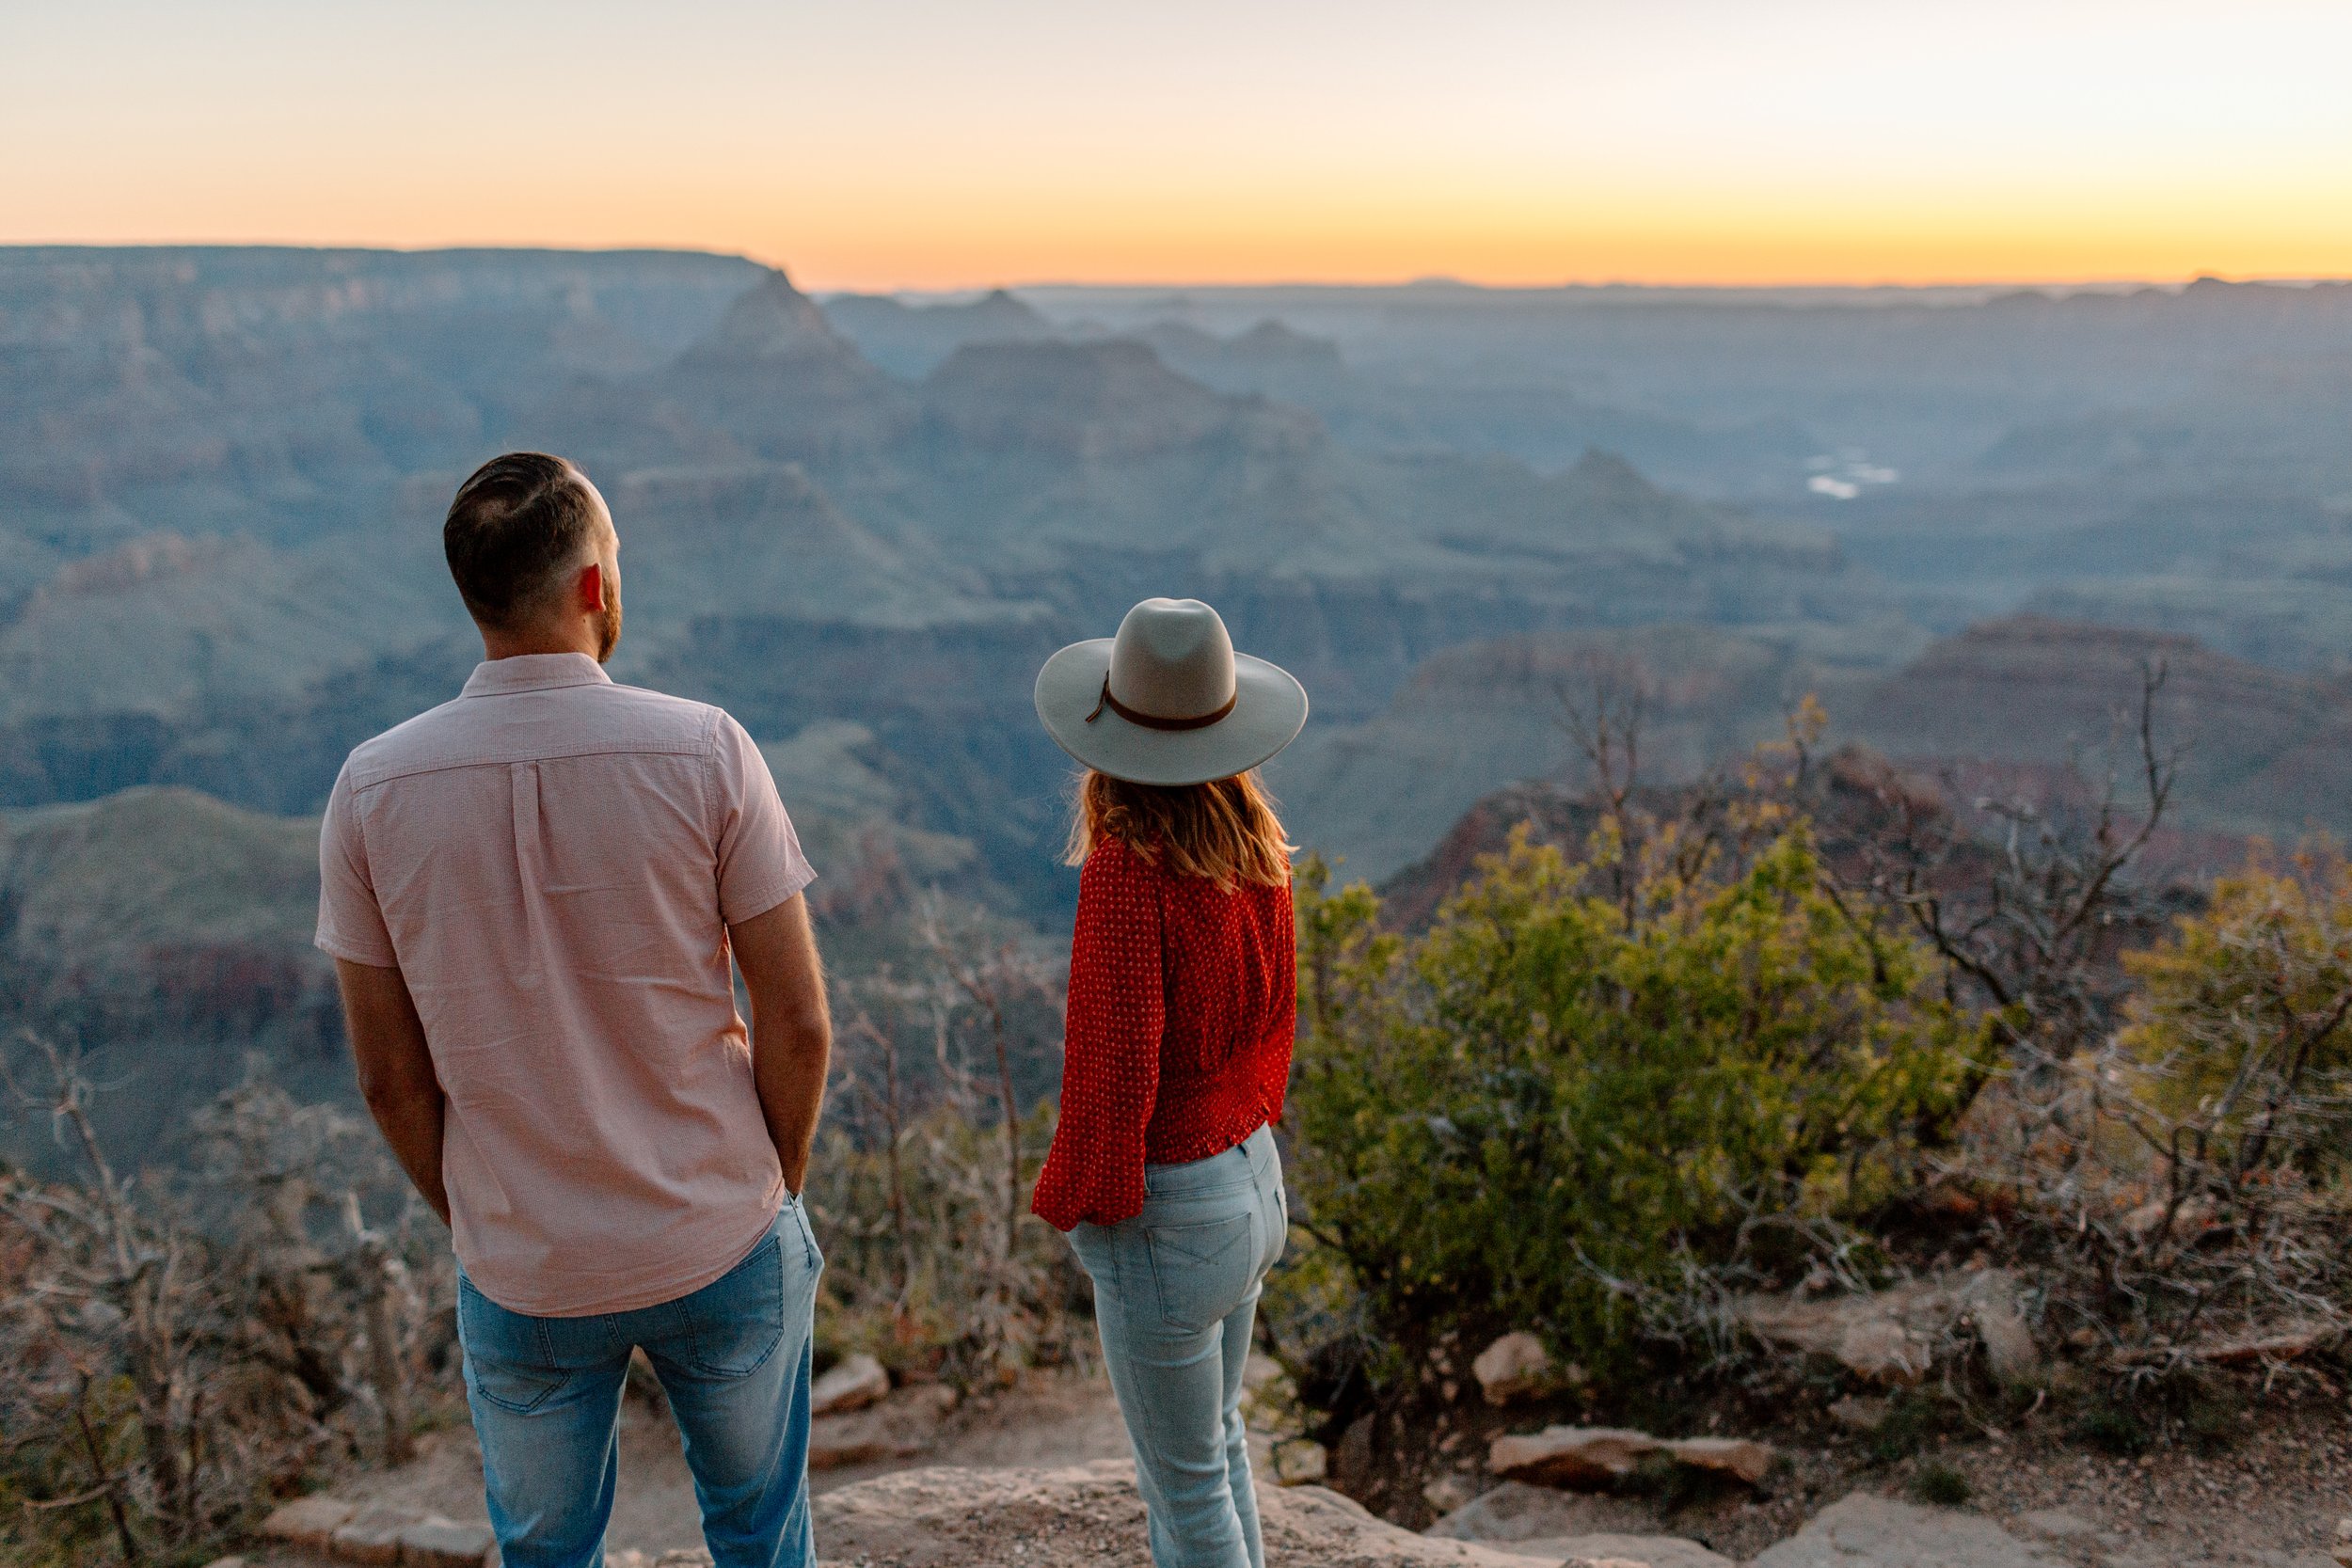  couple looks out towards sunrise at grandview point at the grand canyon 